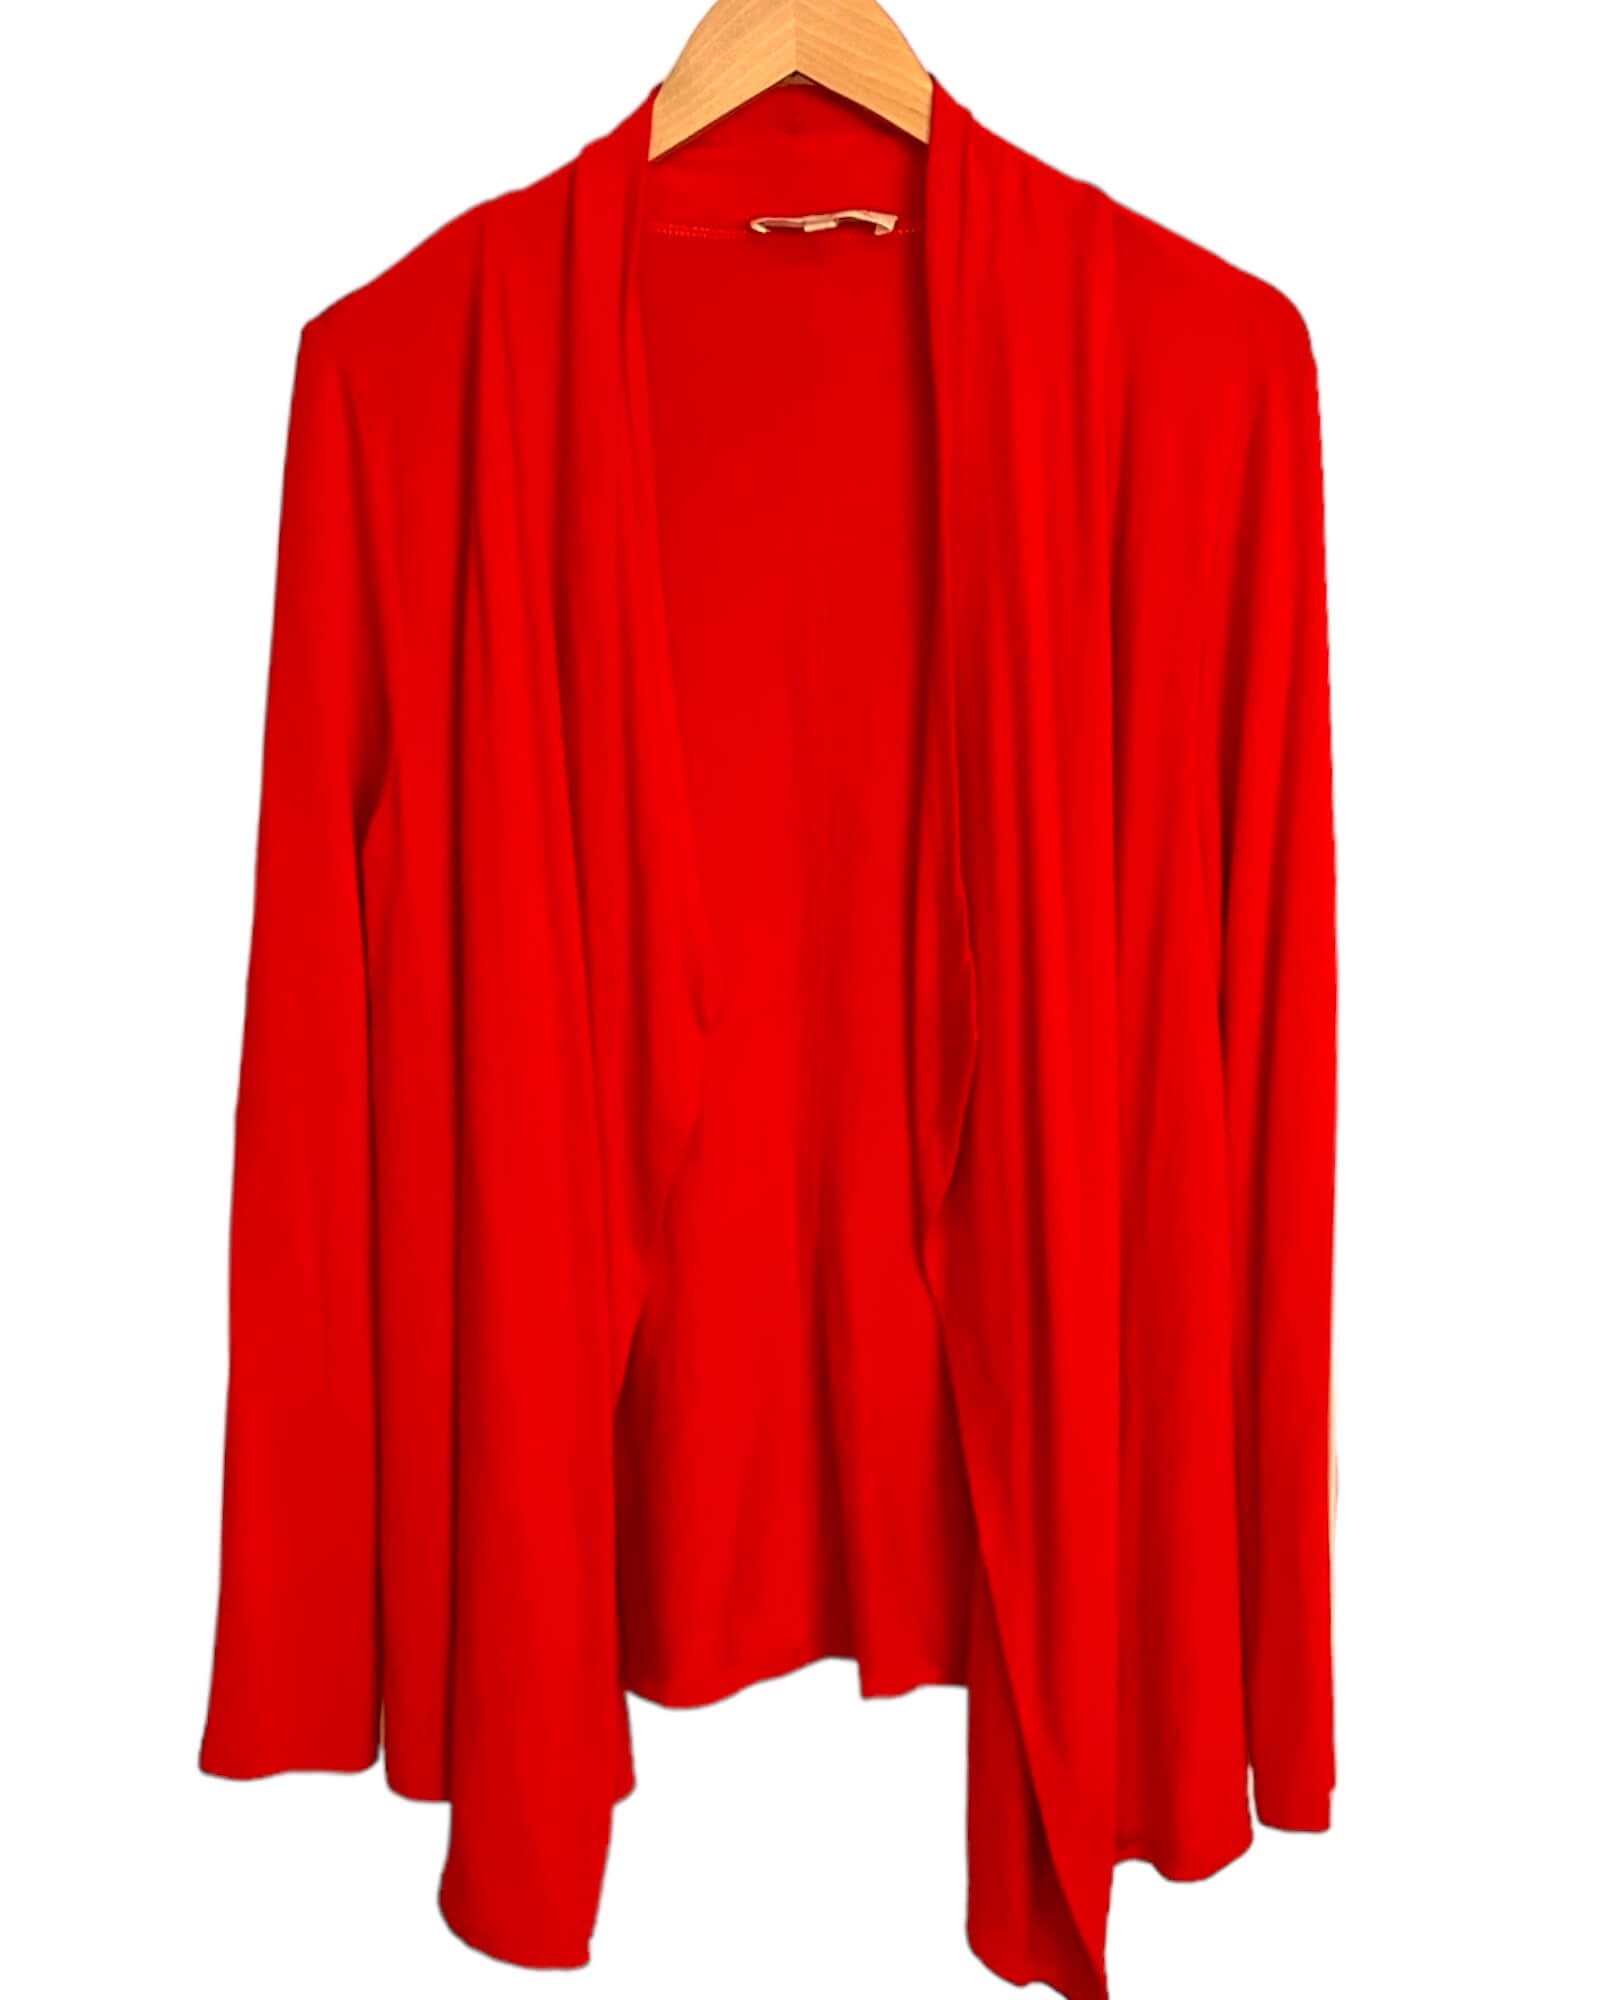 Bright Winter PHILOSOPHY poinsettia red jersey knit open cardigan